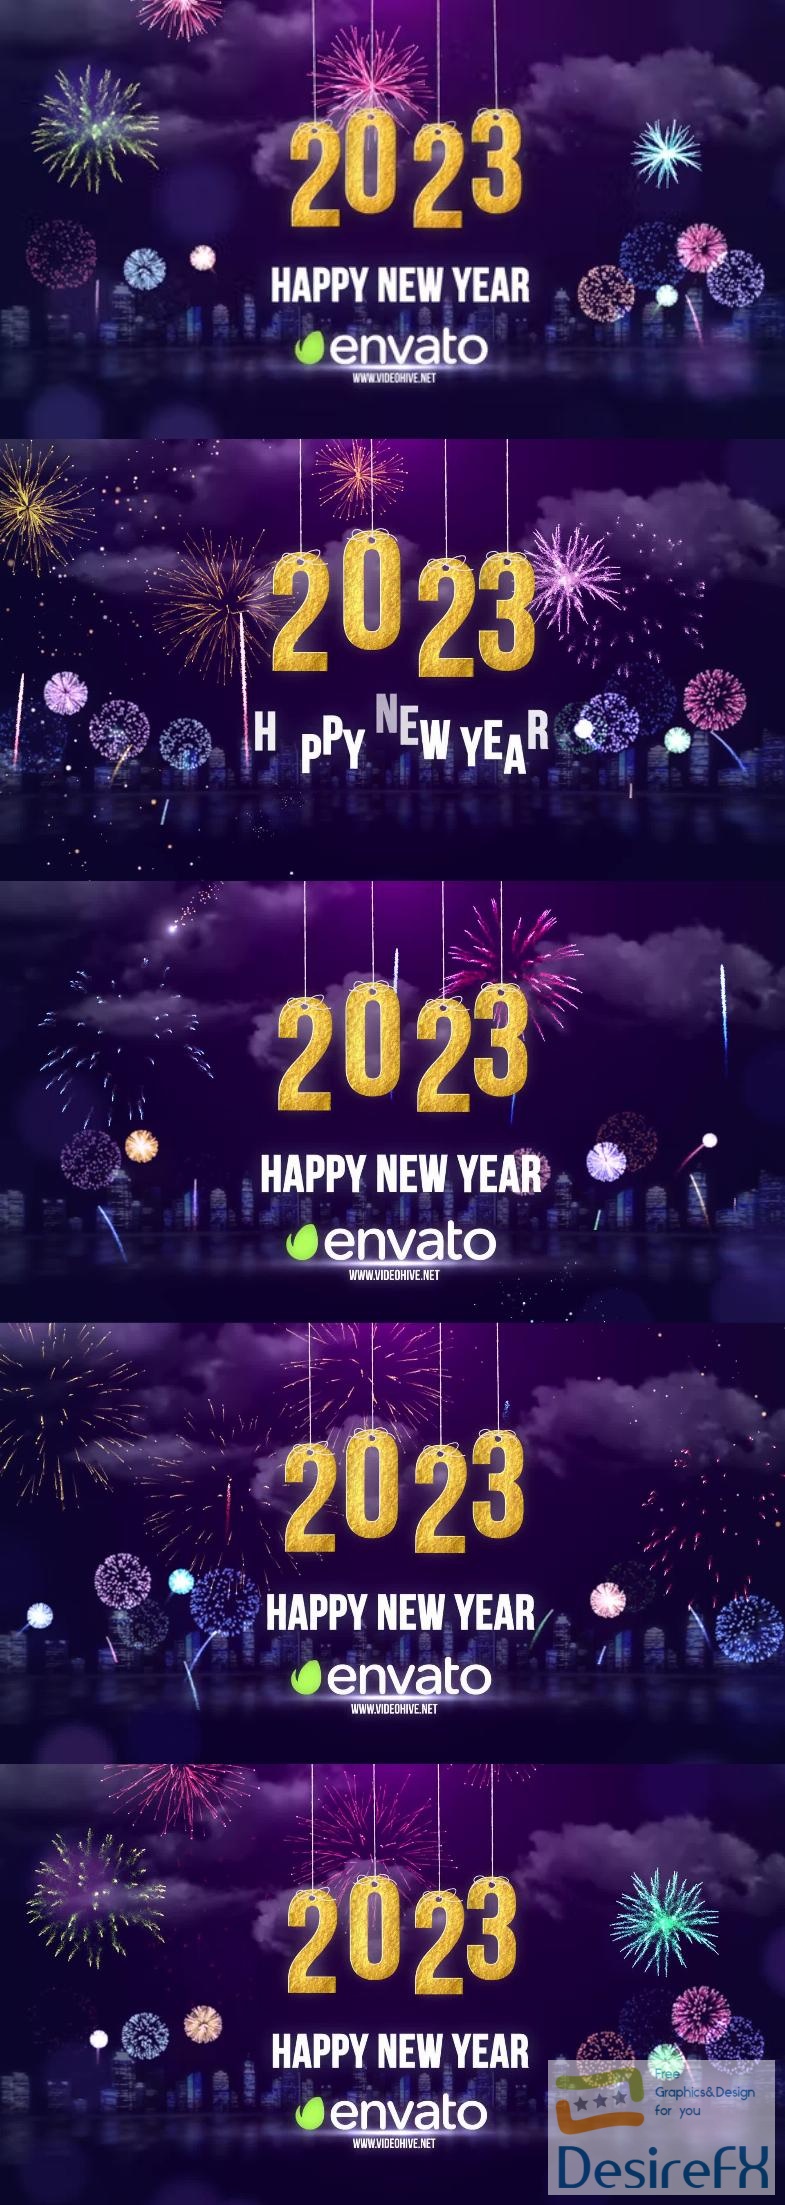 Videohive Happy New Year Wishes 2023 42463285